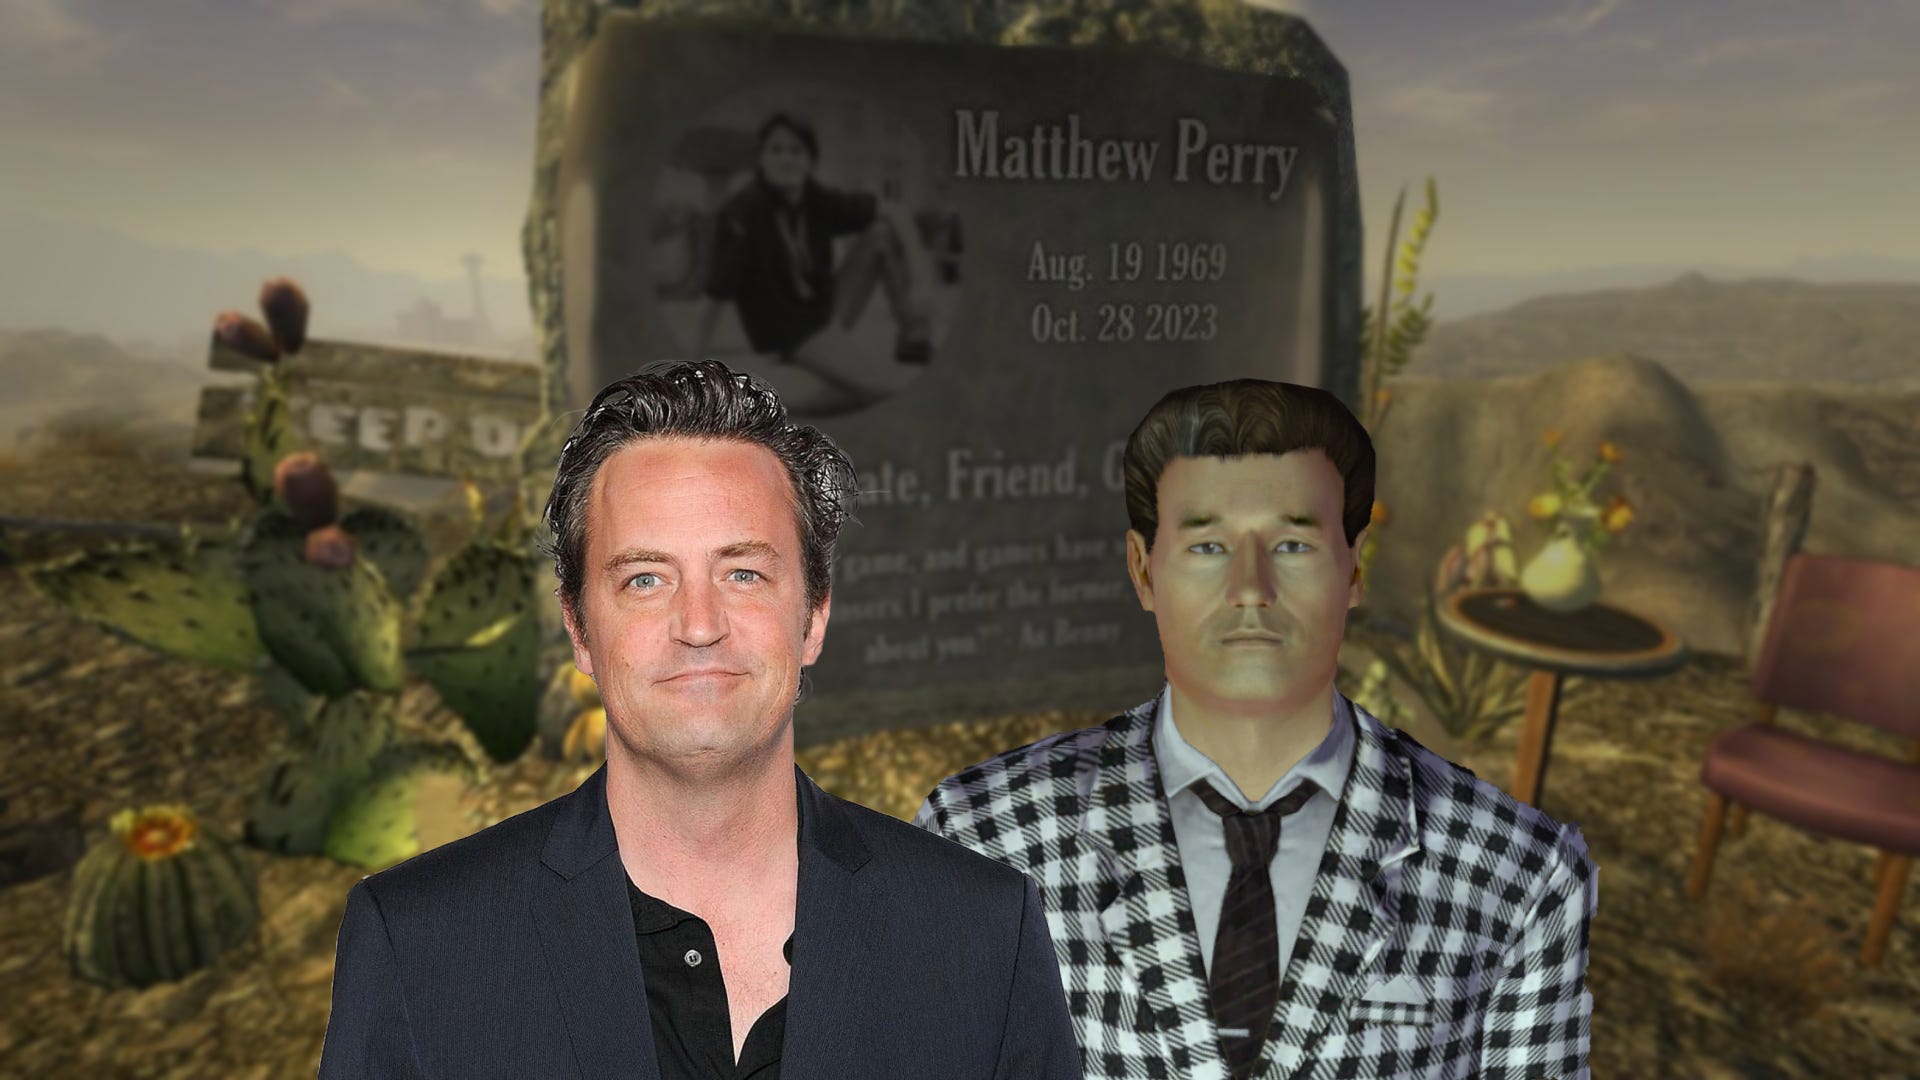 “I’m gonna do something simple, but meaningful” – How a Fallout New Vegas modder memorialised Matthew Perry